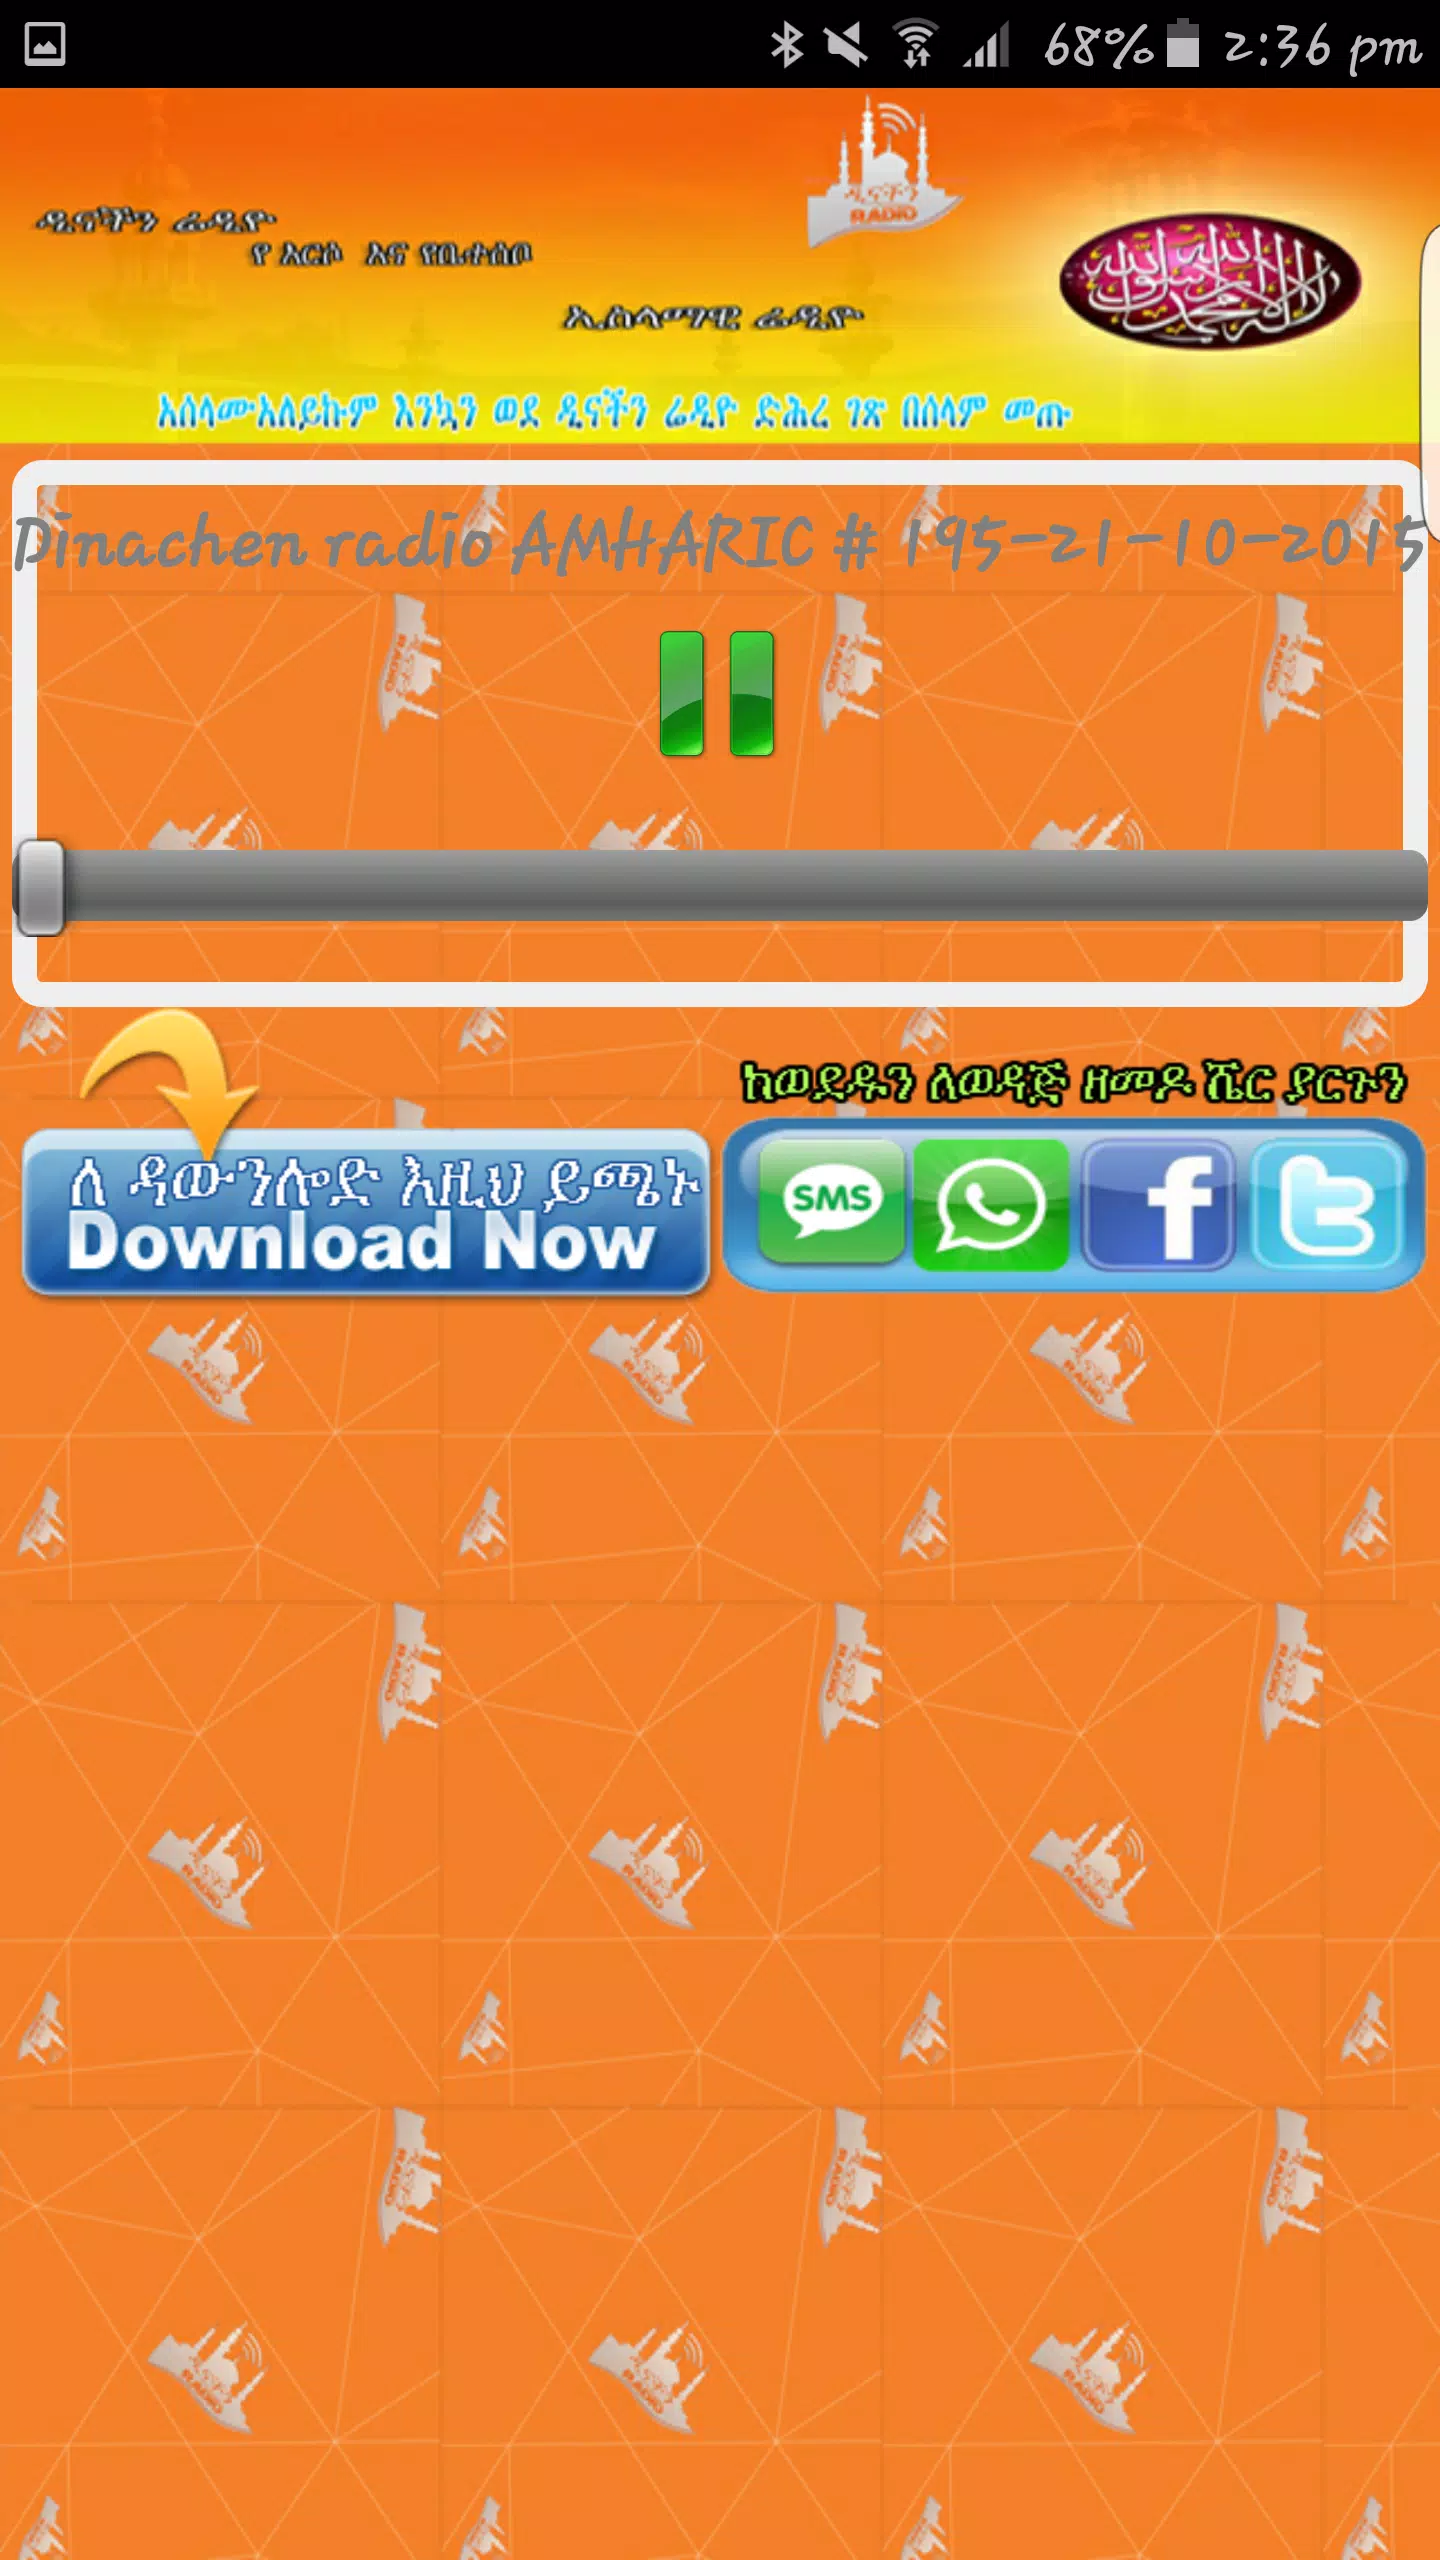 DINACHEN RADIO AMHARIC APK for Android Download